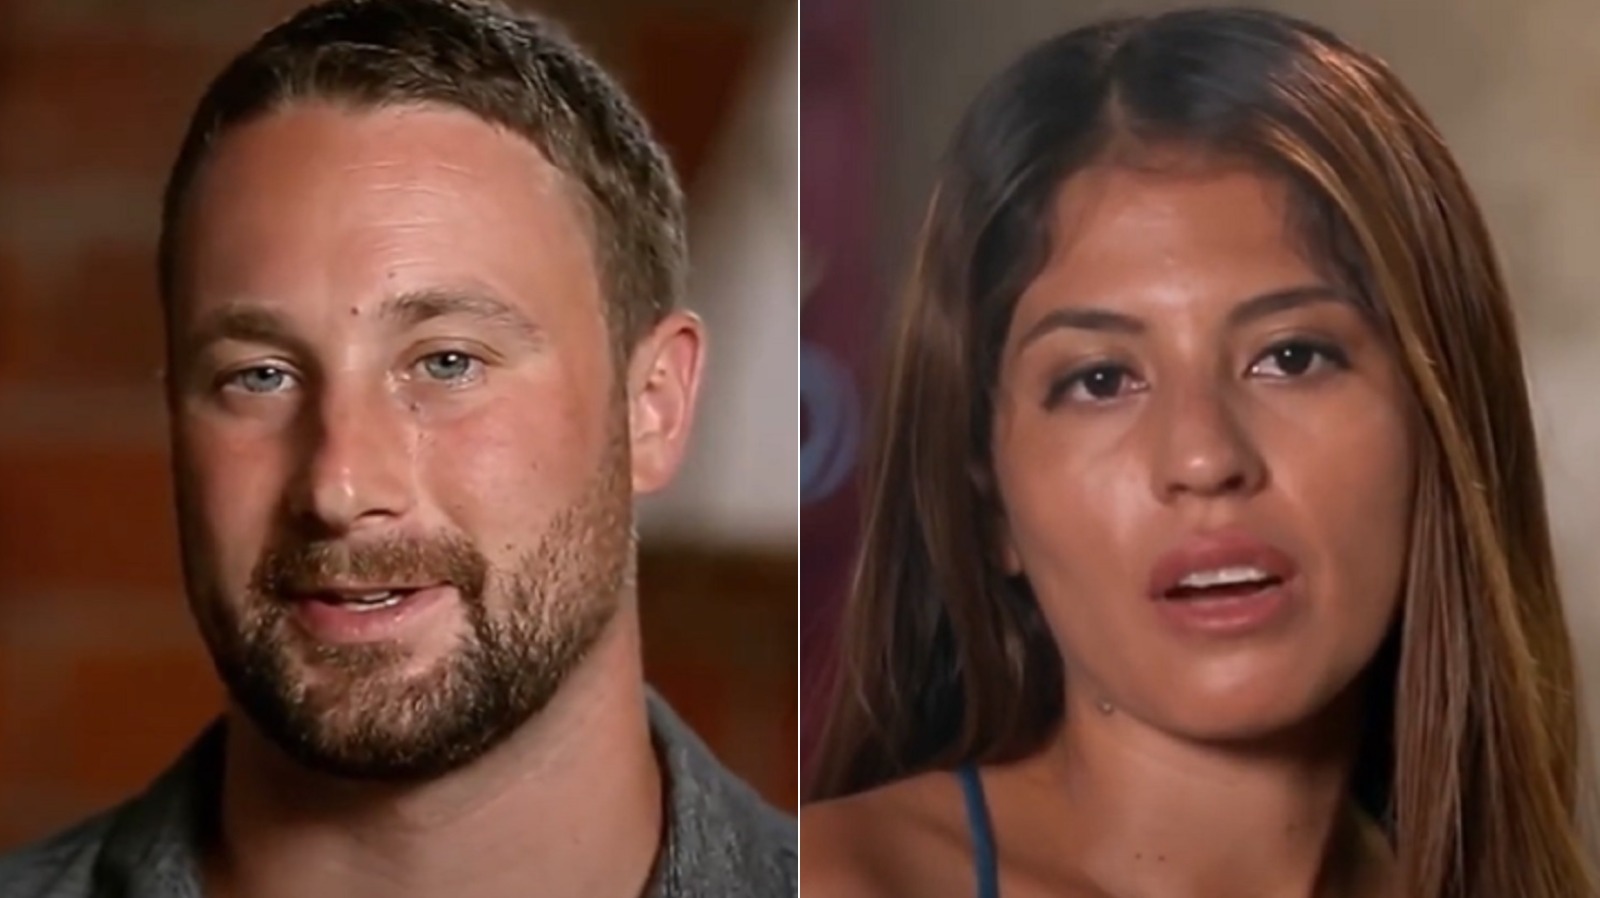 90 Day Fiance couple Evelin Villegas and Corey Rathgeber have been in a rol...